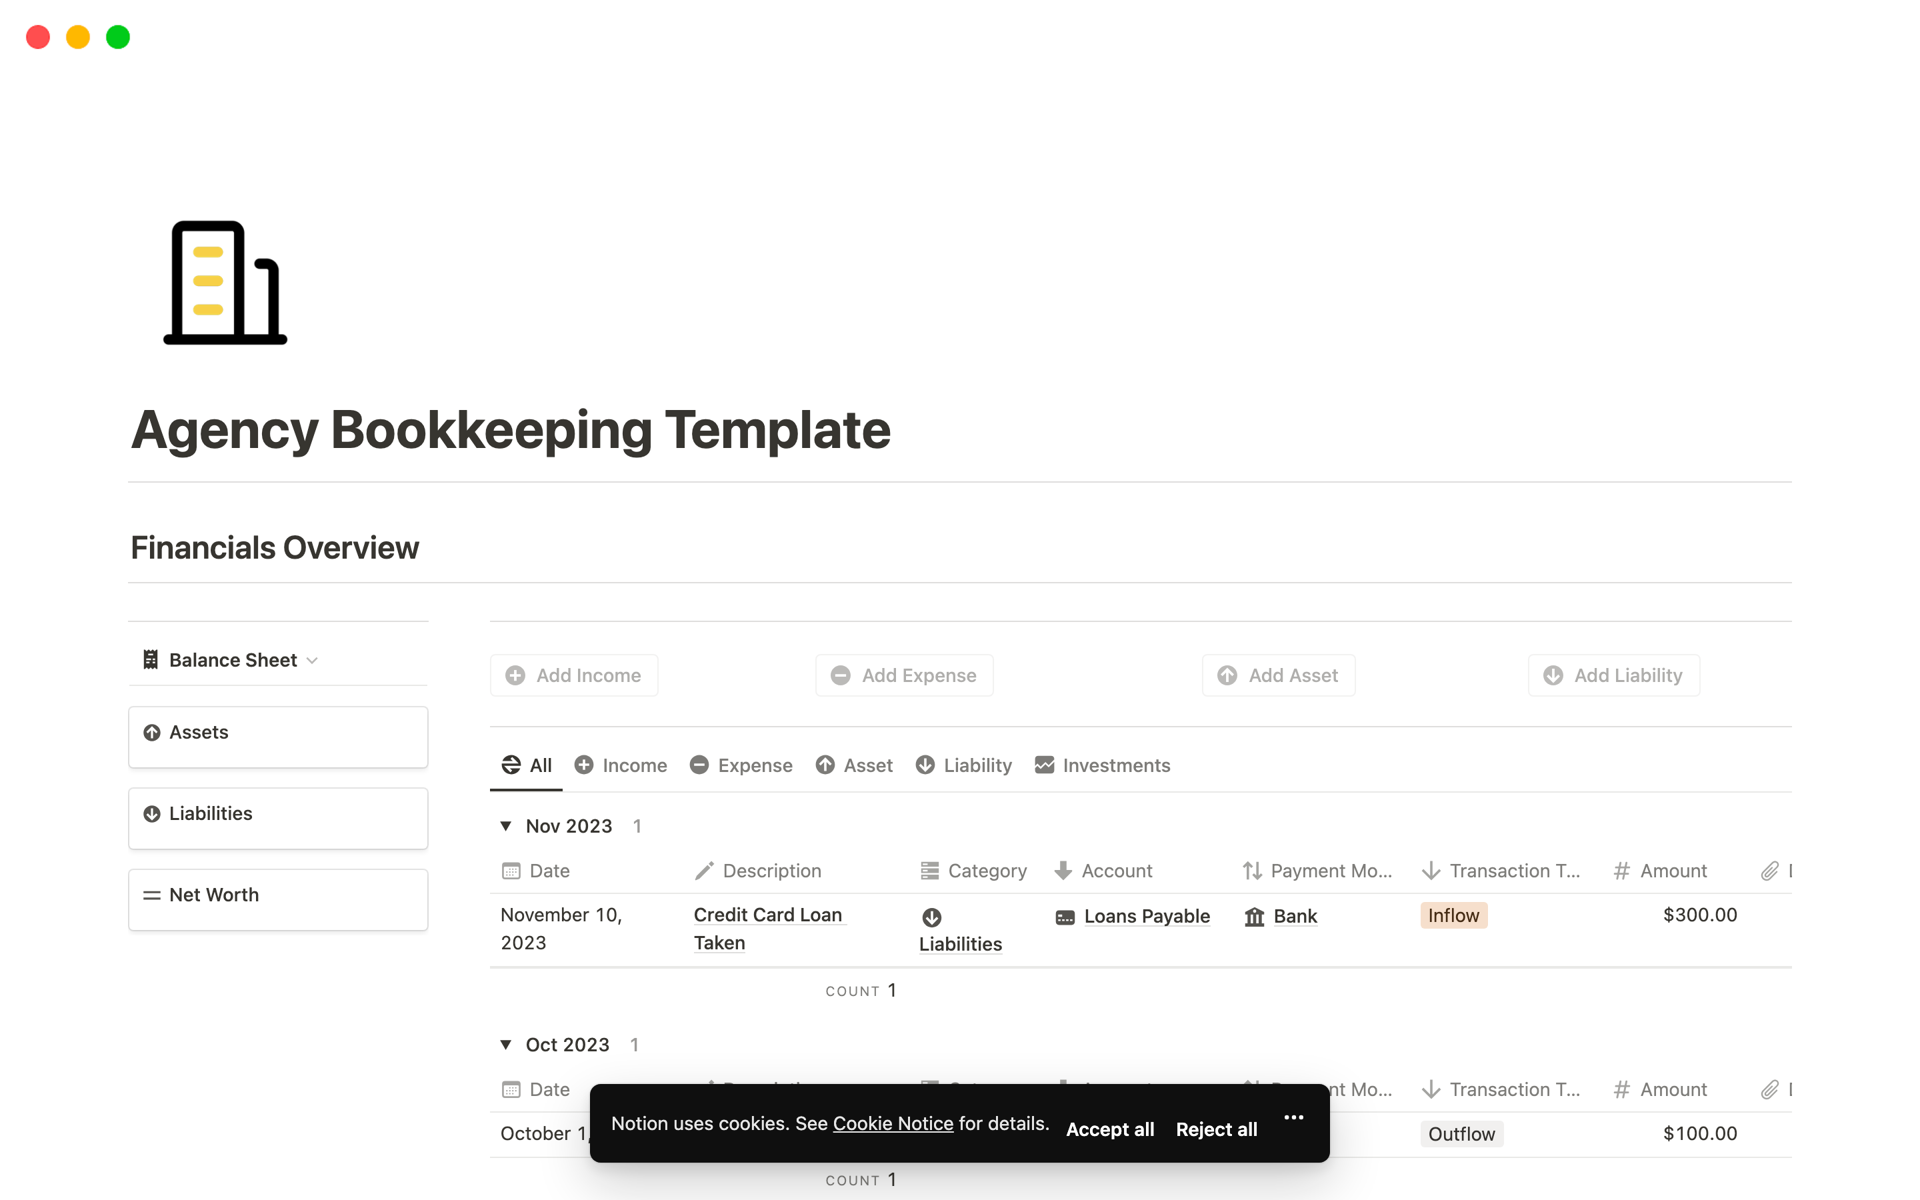 This bookkeeping template provides best solution for agencies to manage their business finances, produce income statement, balance sheet, cash flow statement and much more on a periodical basis.